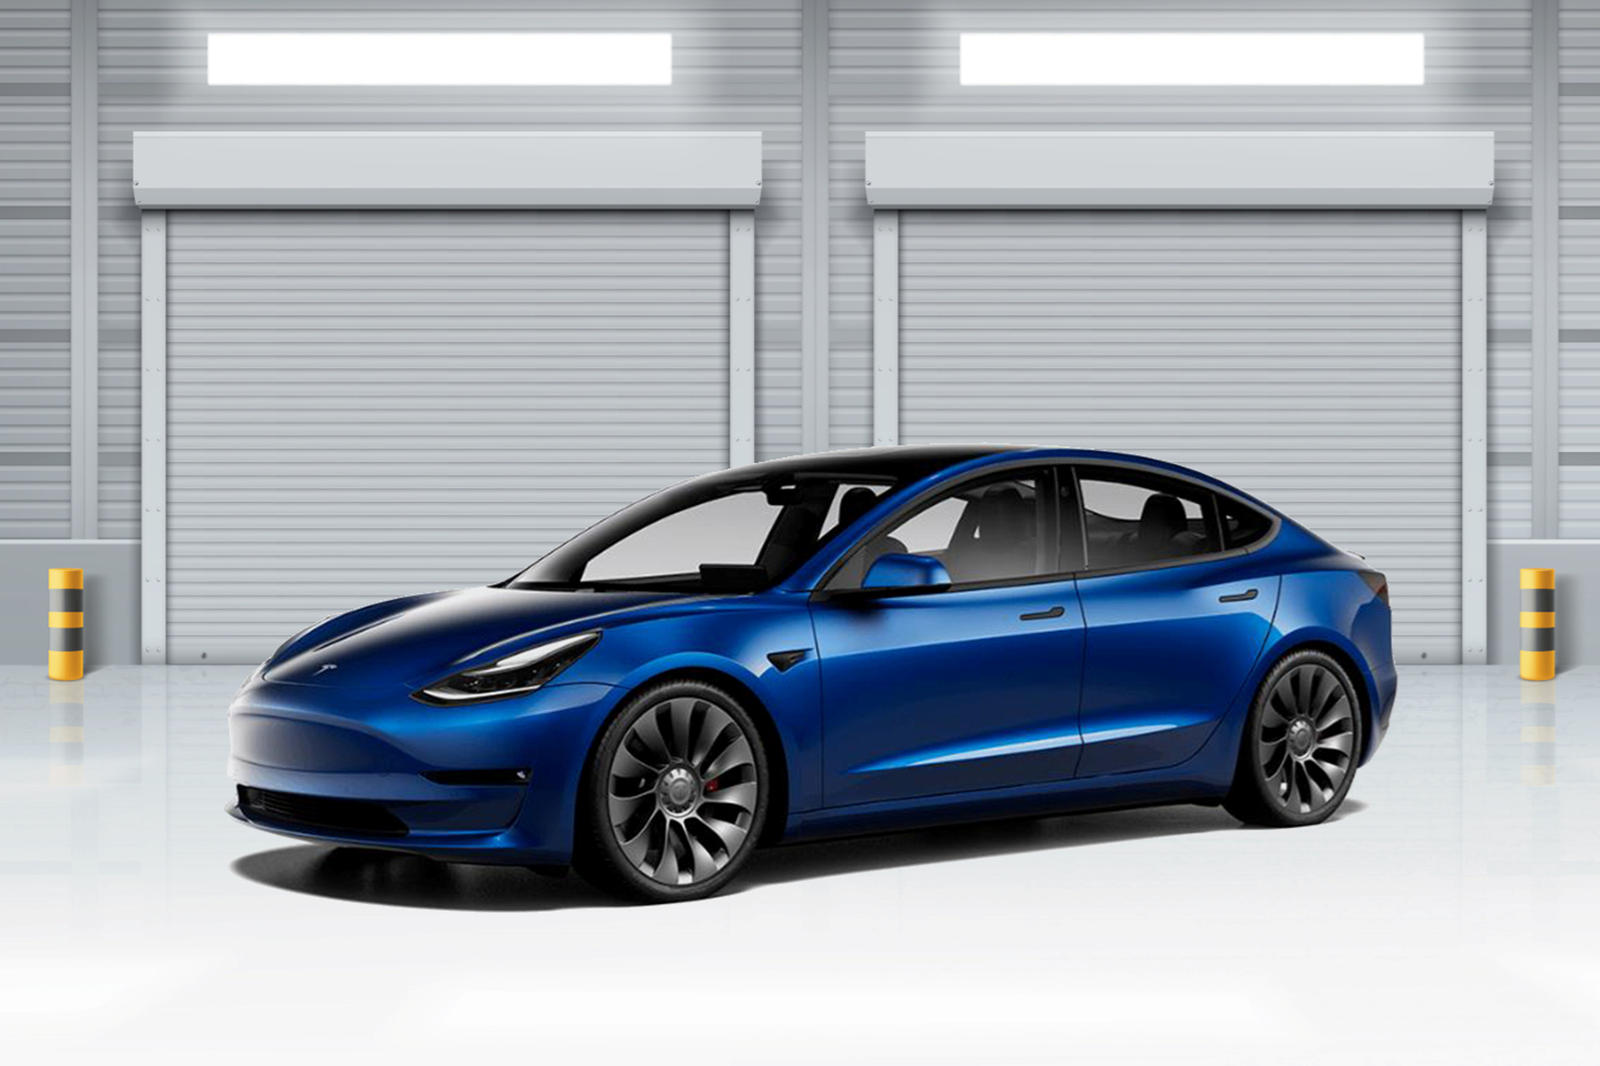 This Is The Secret Behind The 2021 Tesla Model 3's Increased Range | CarBuzz